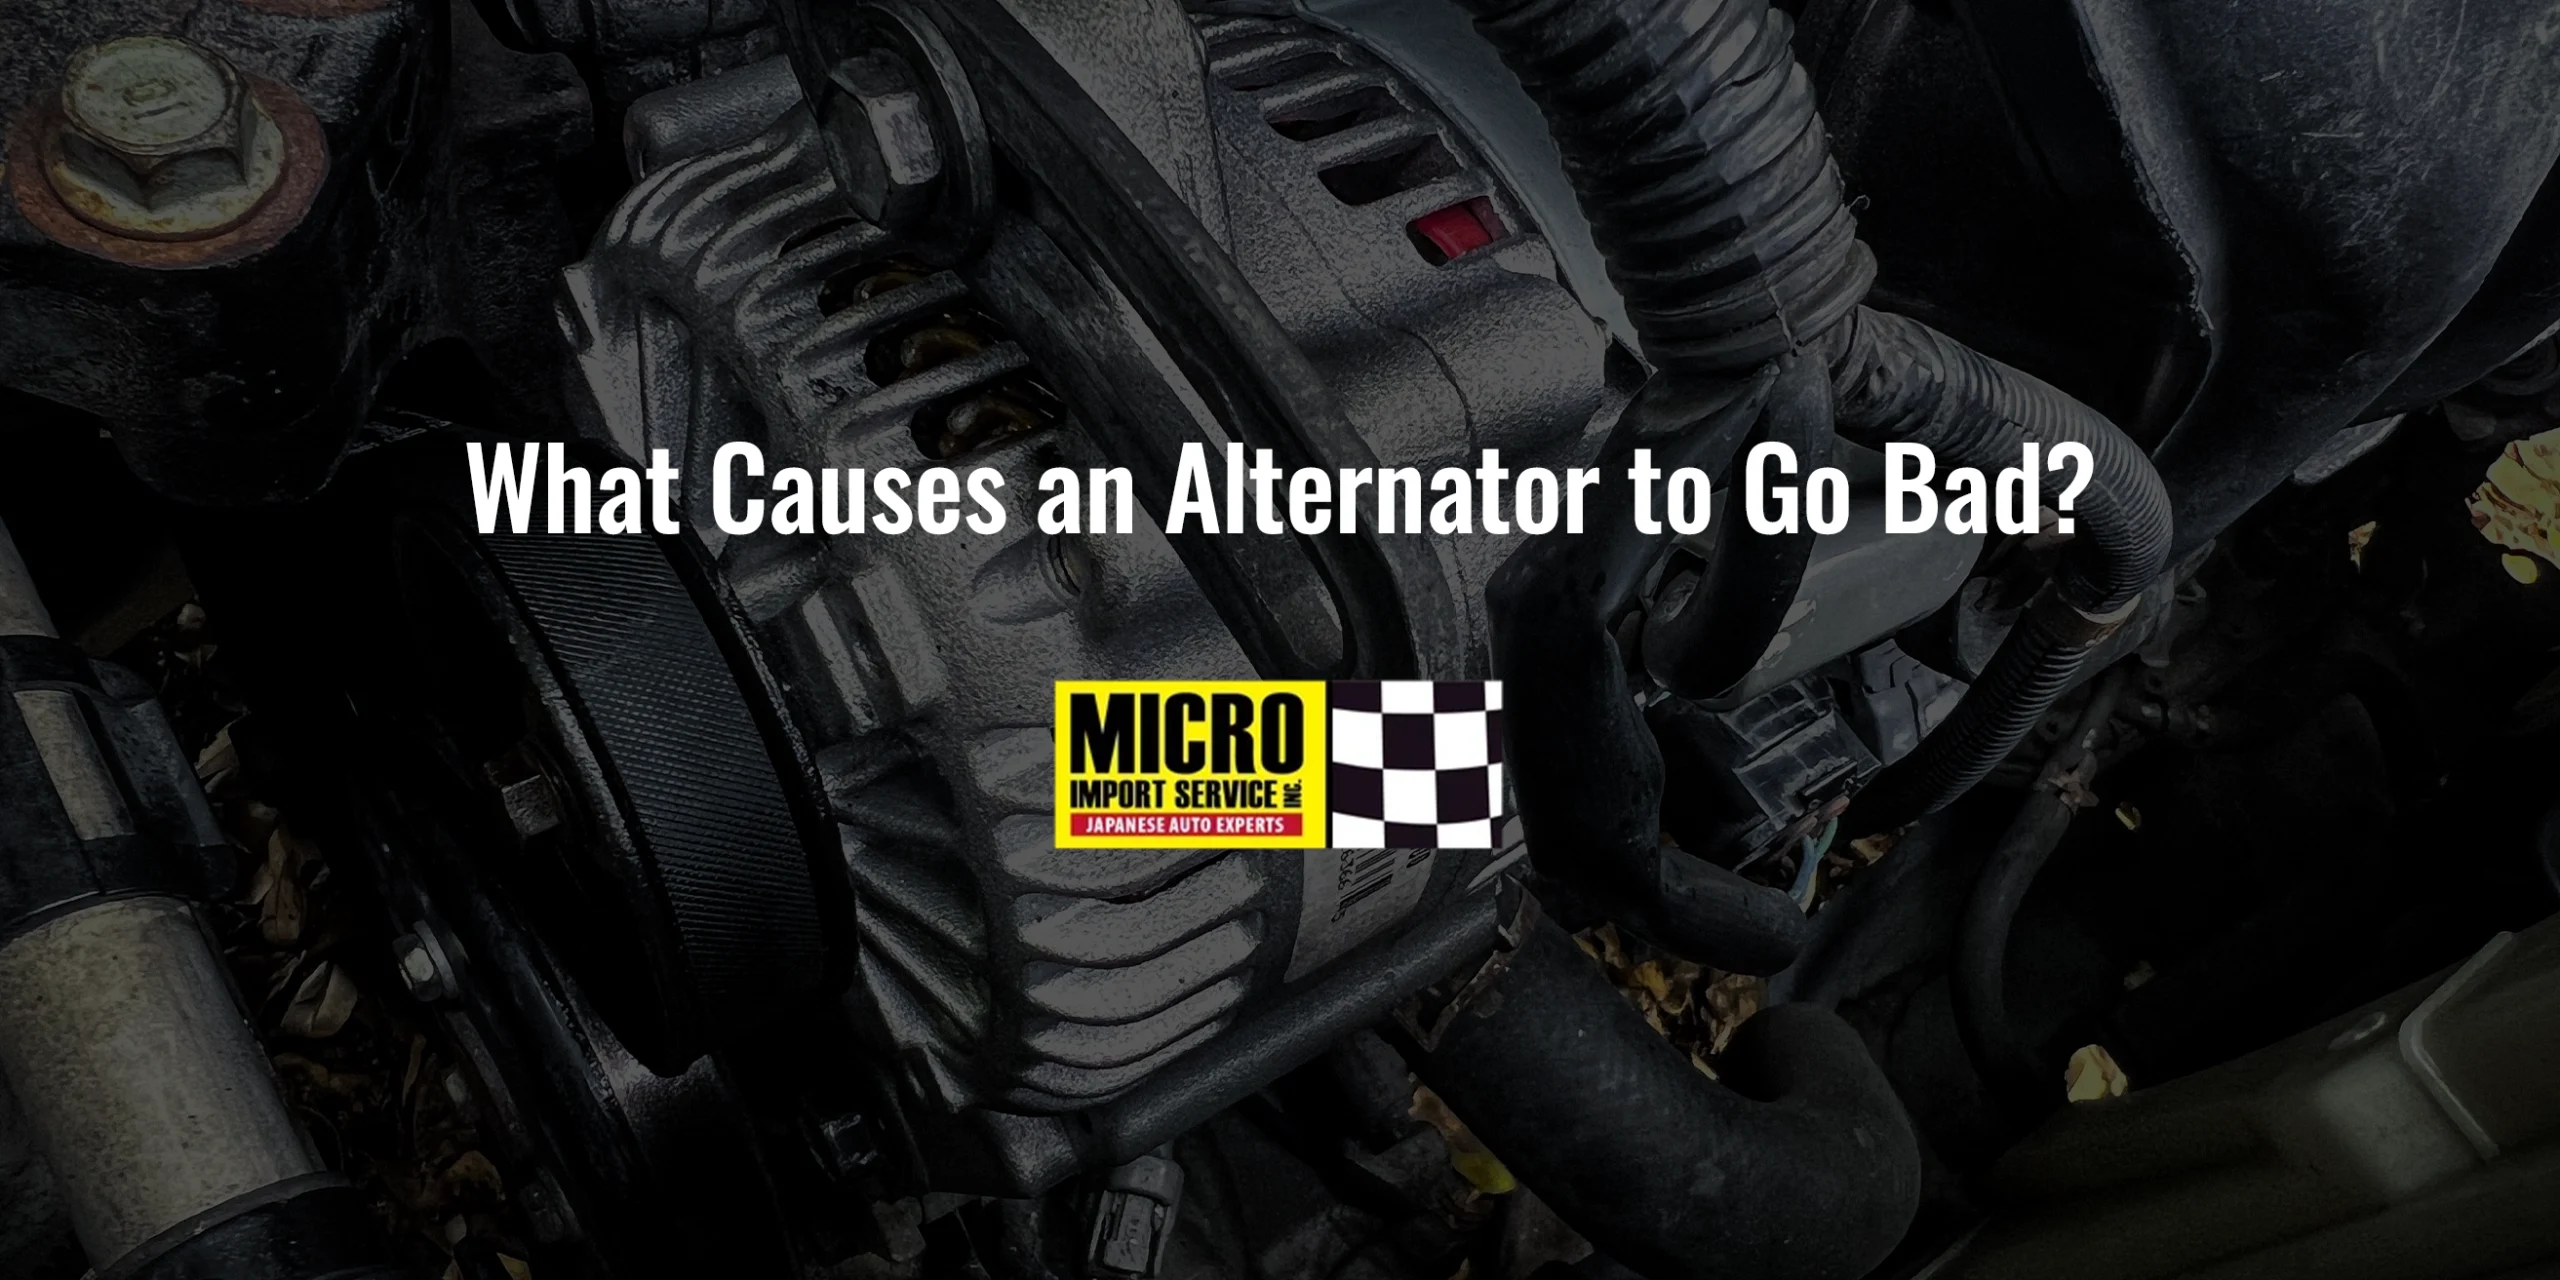 What Causes an Alternator to Go Bad?